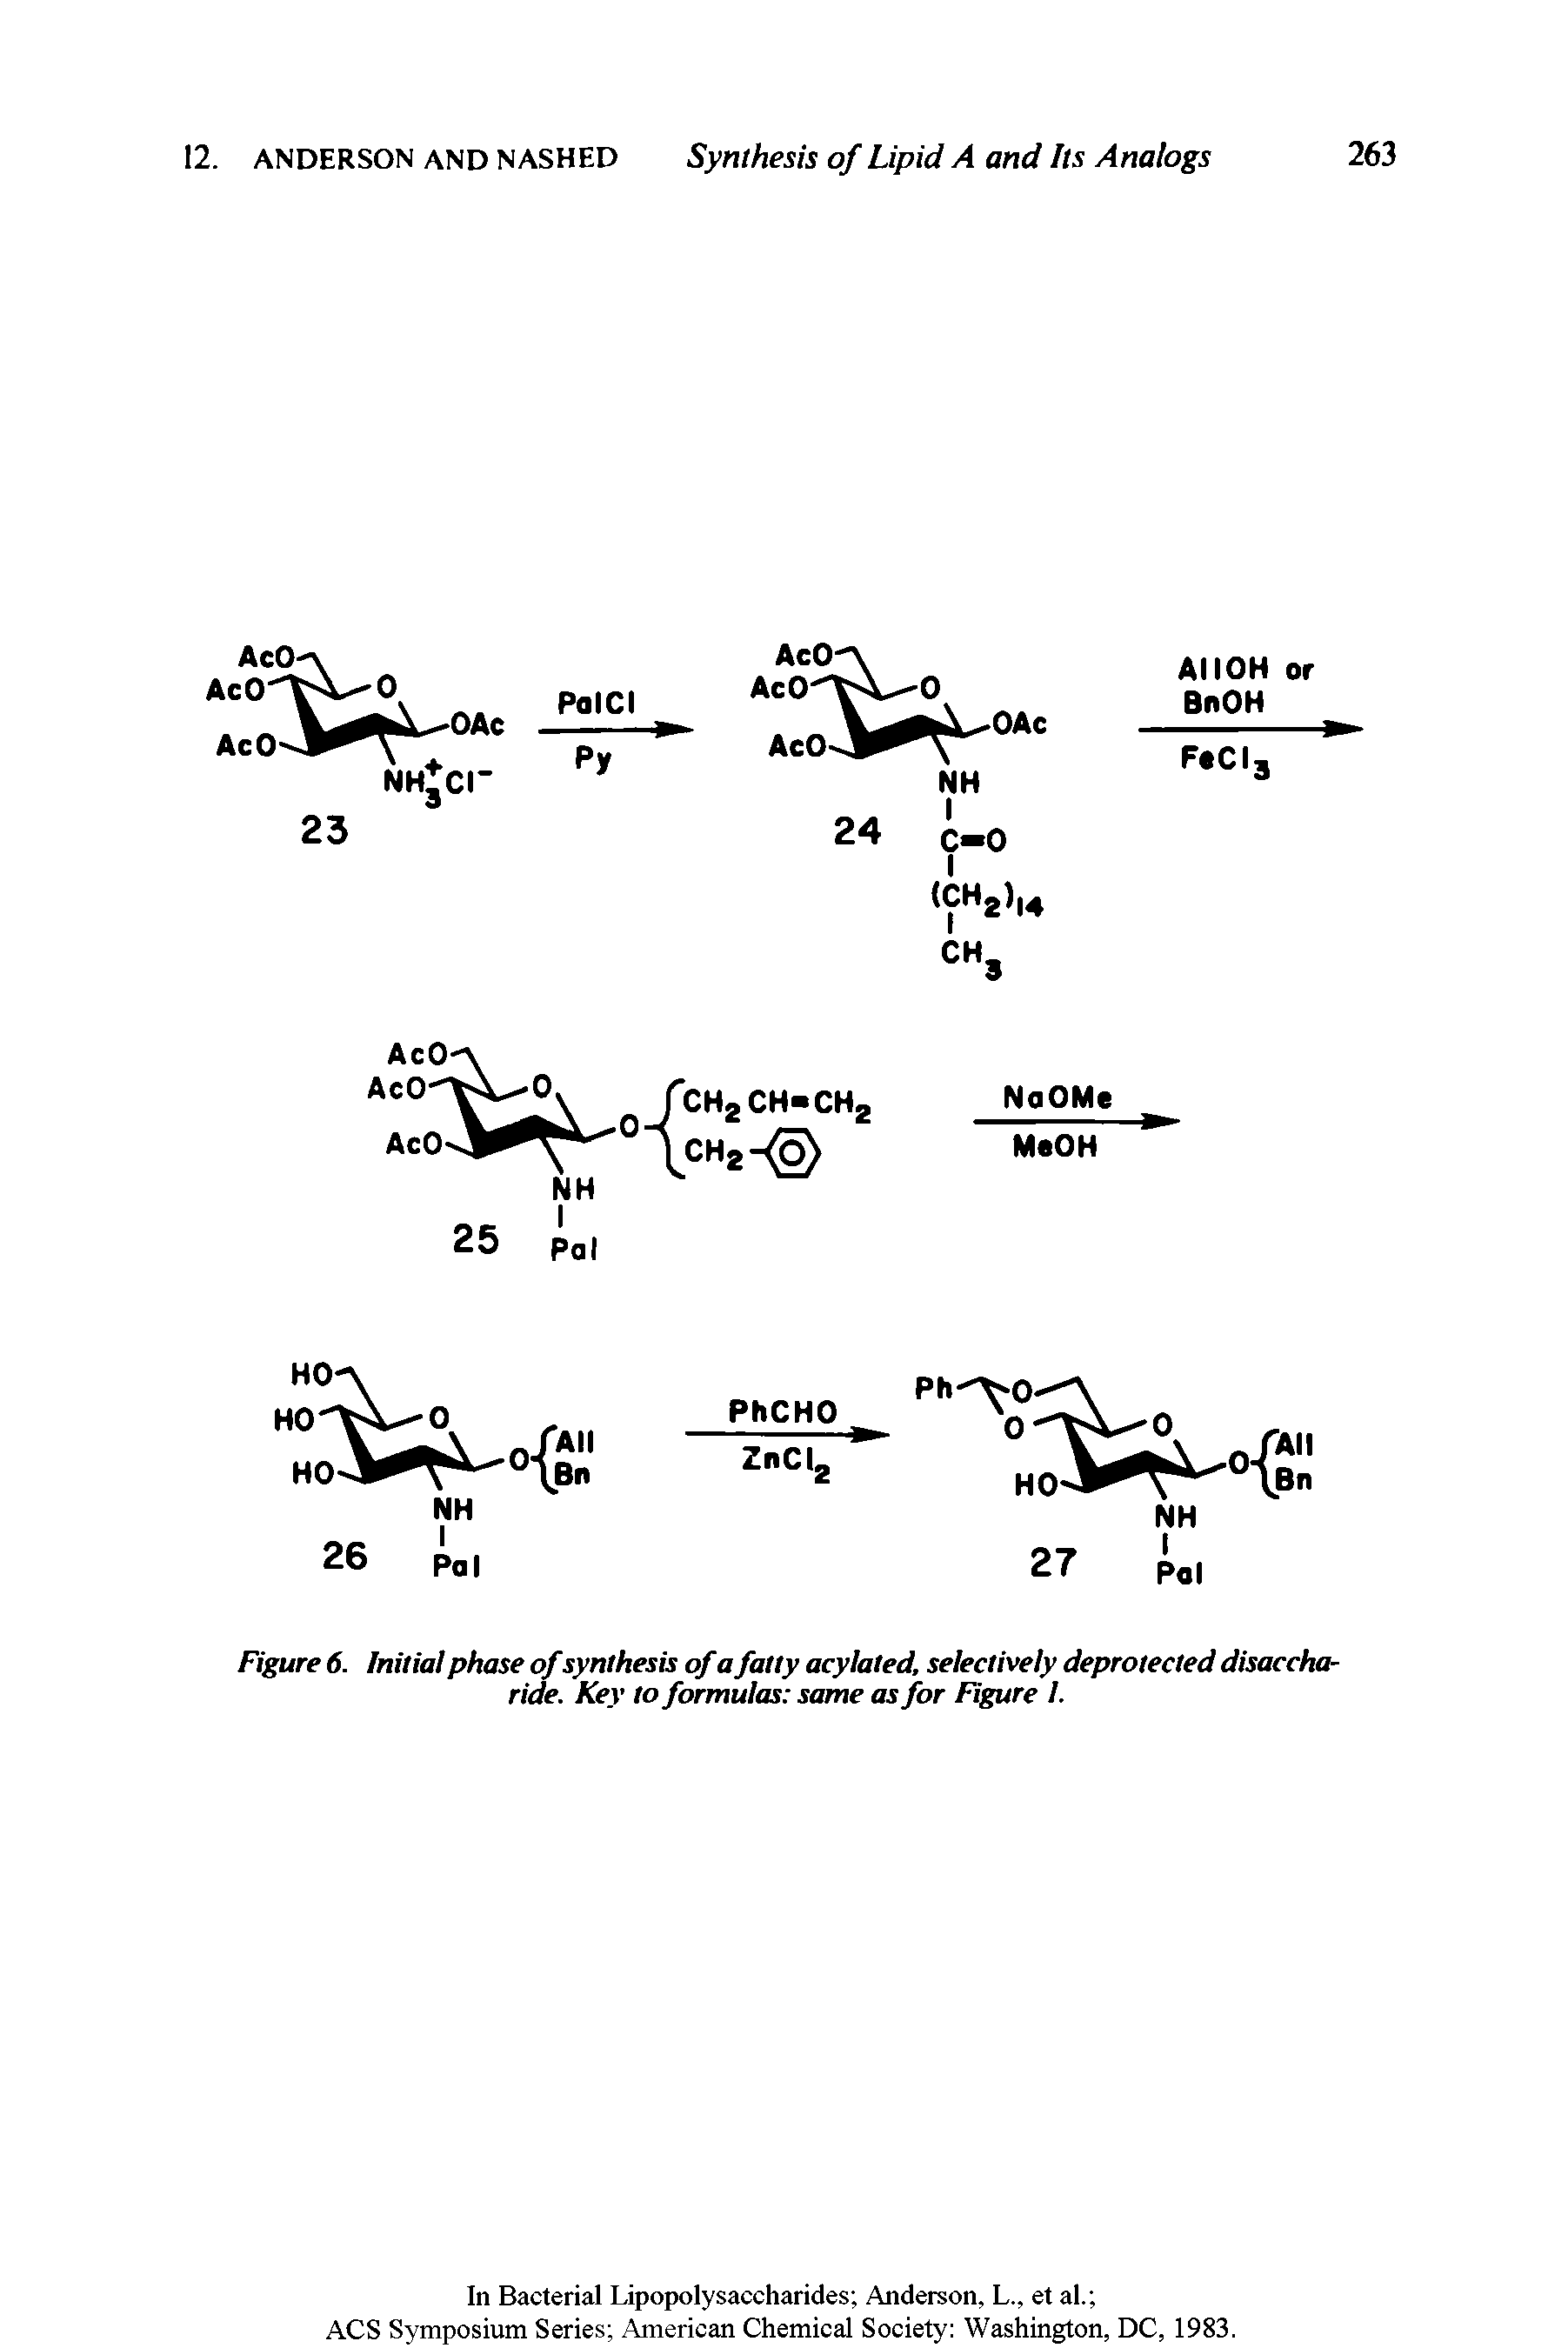 Figure 6. Initial phase ofsynthesis of a fatty acylated, selectively deprotected disaccharide. Key to formulas same as for Figure I.